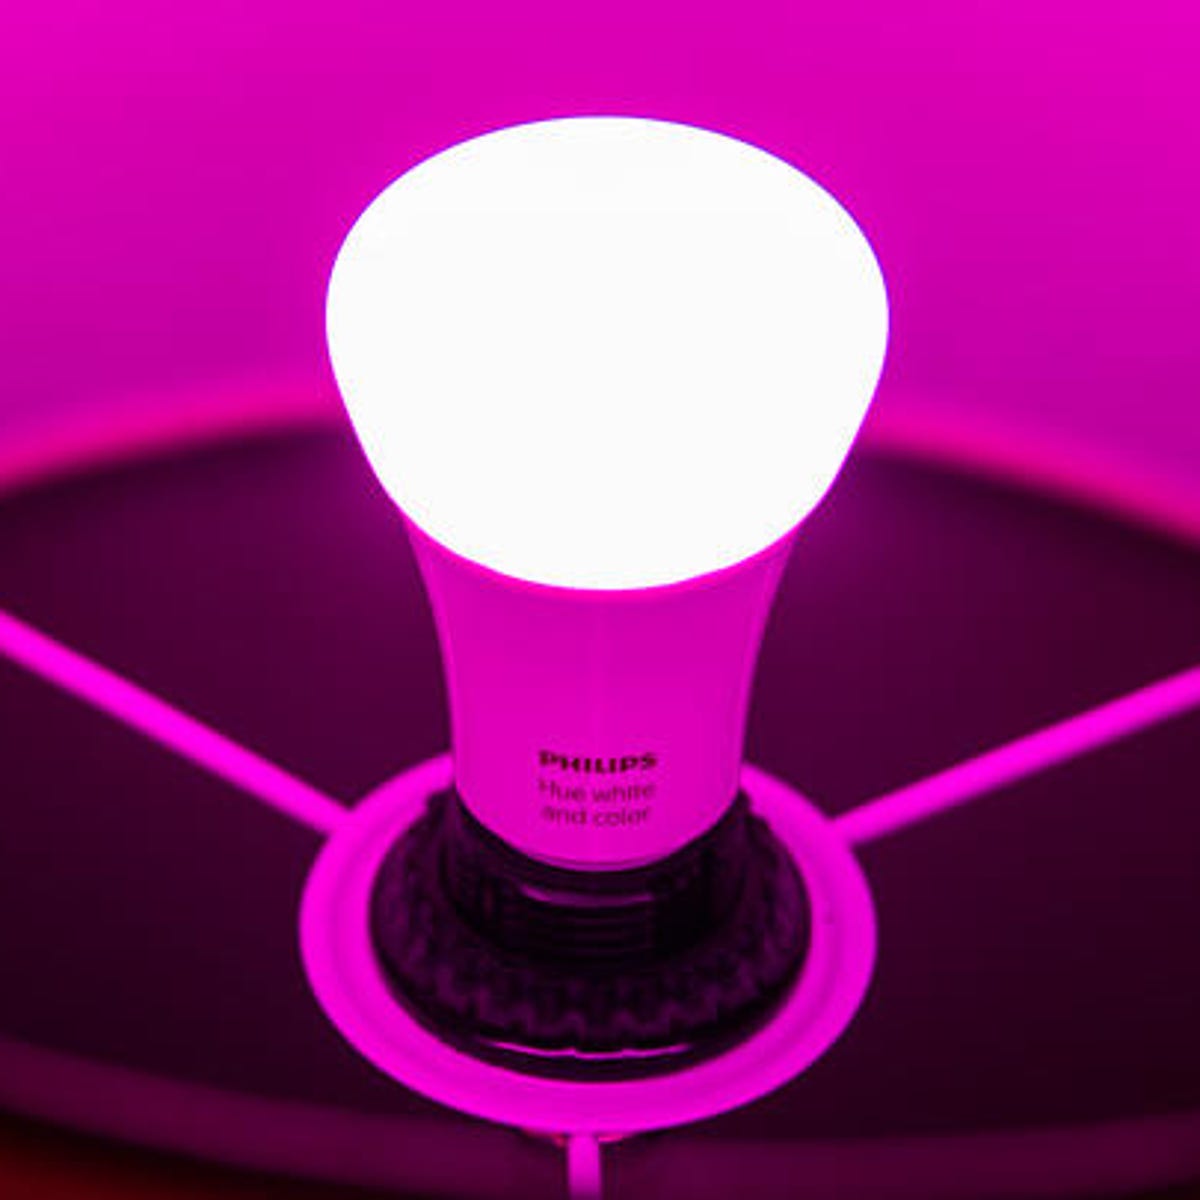 Accusation slack Fiddle The complete guide to Philips Hue: Bulbs, smart features and lots of colors  - CNET